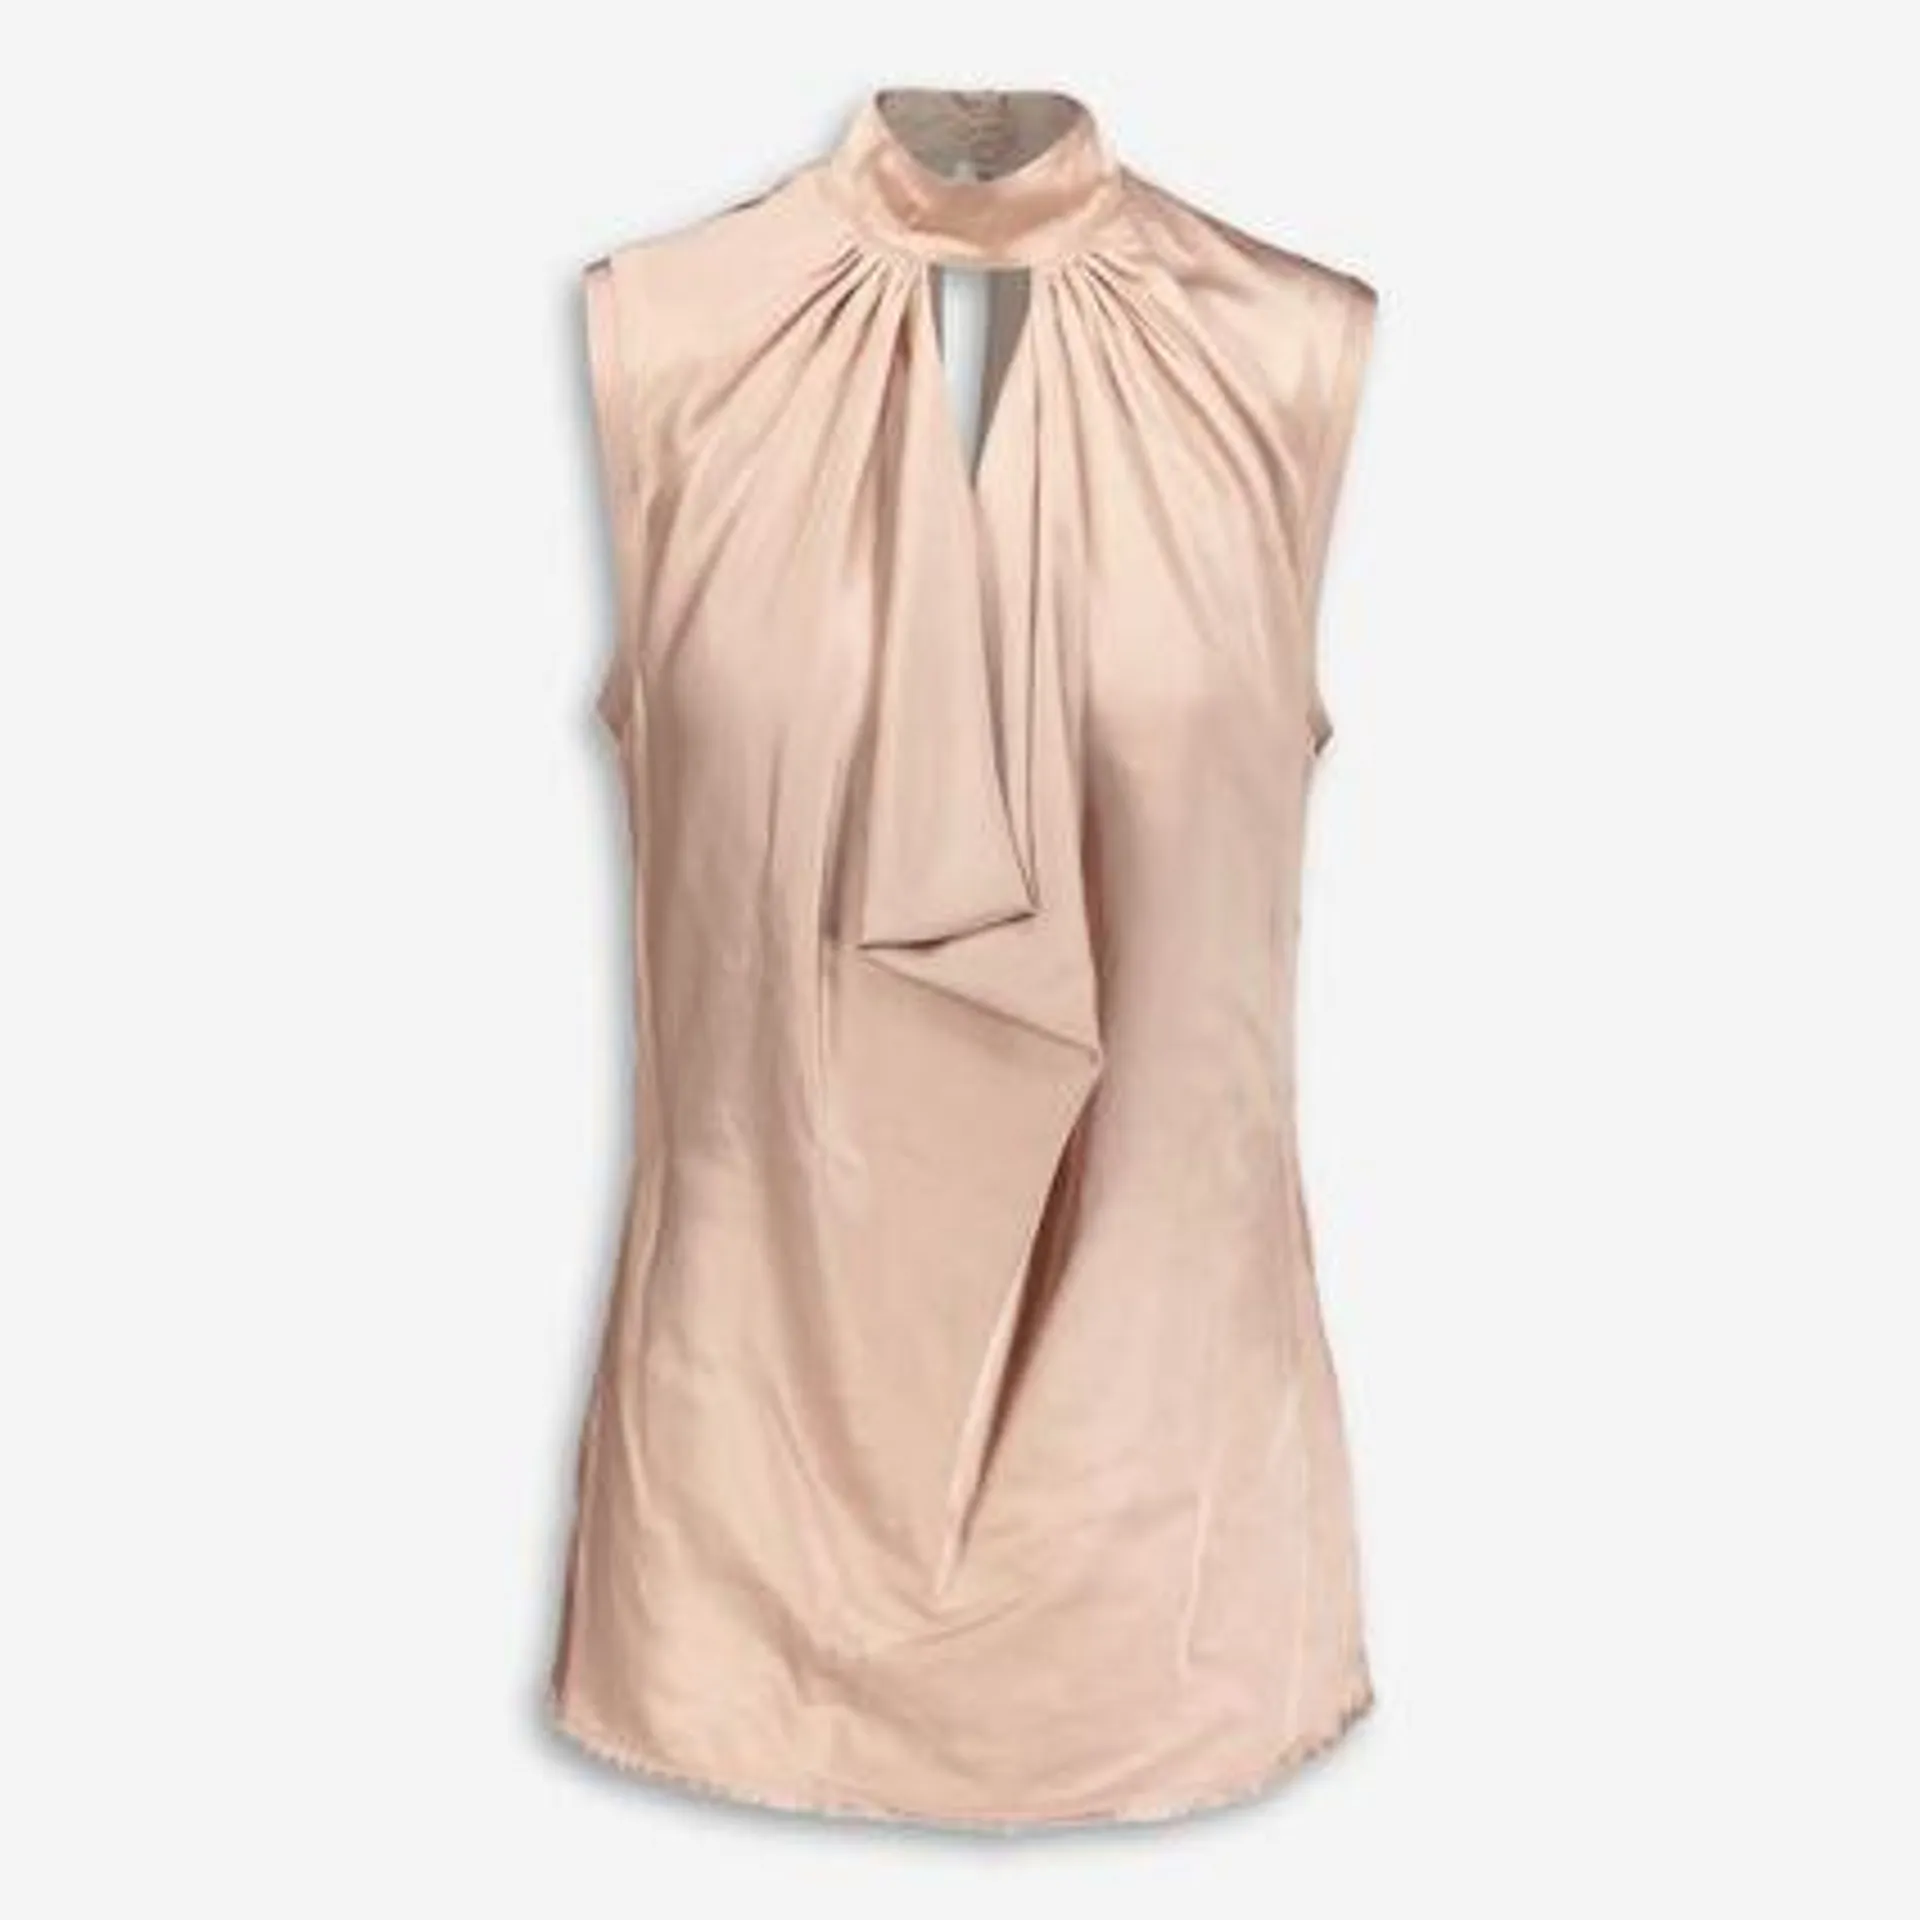 Dusty Pink Satin Top